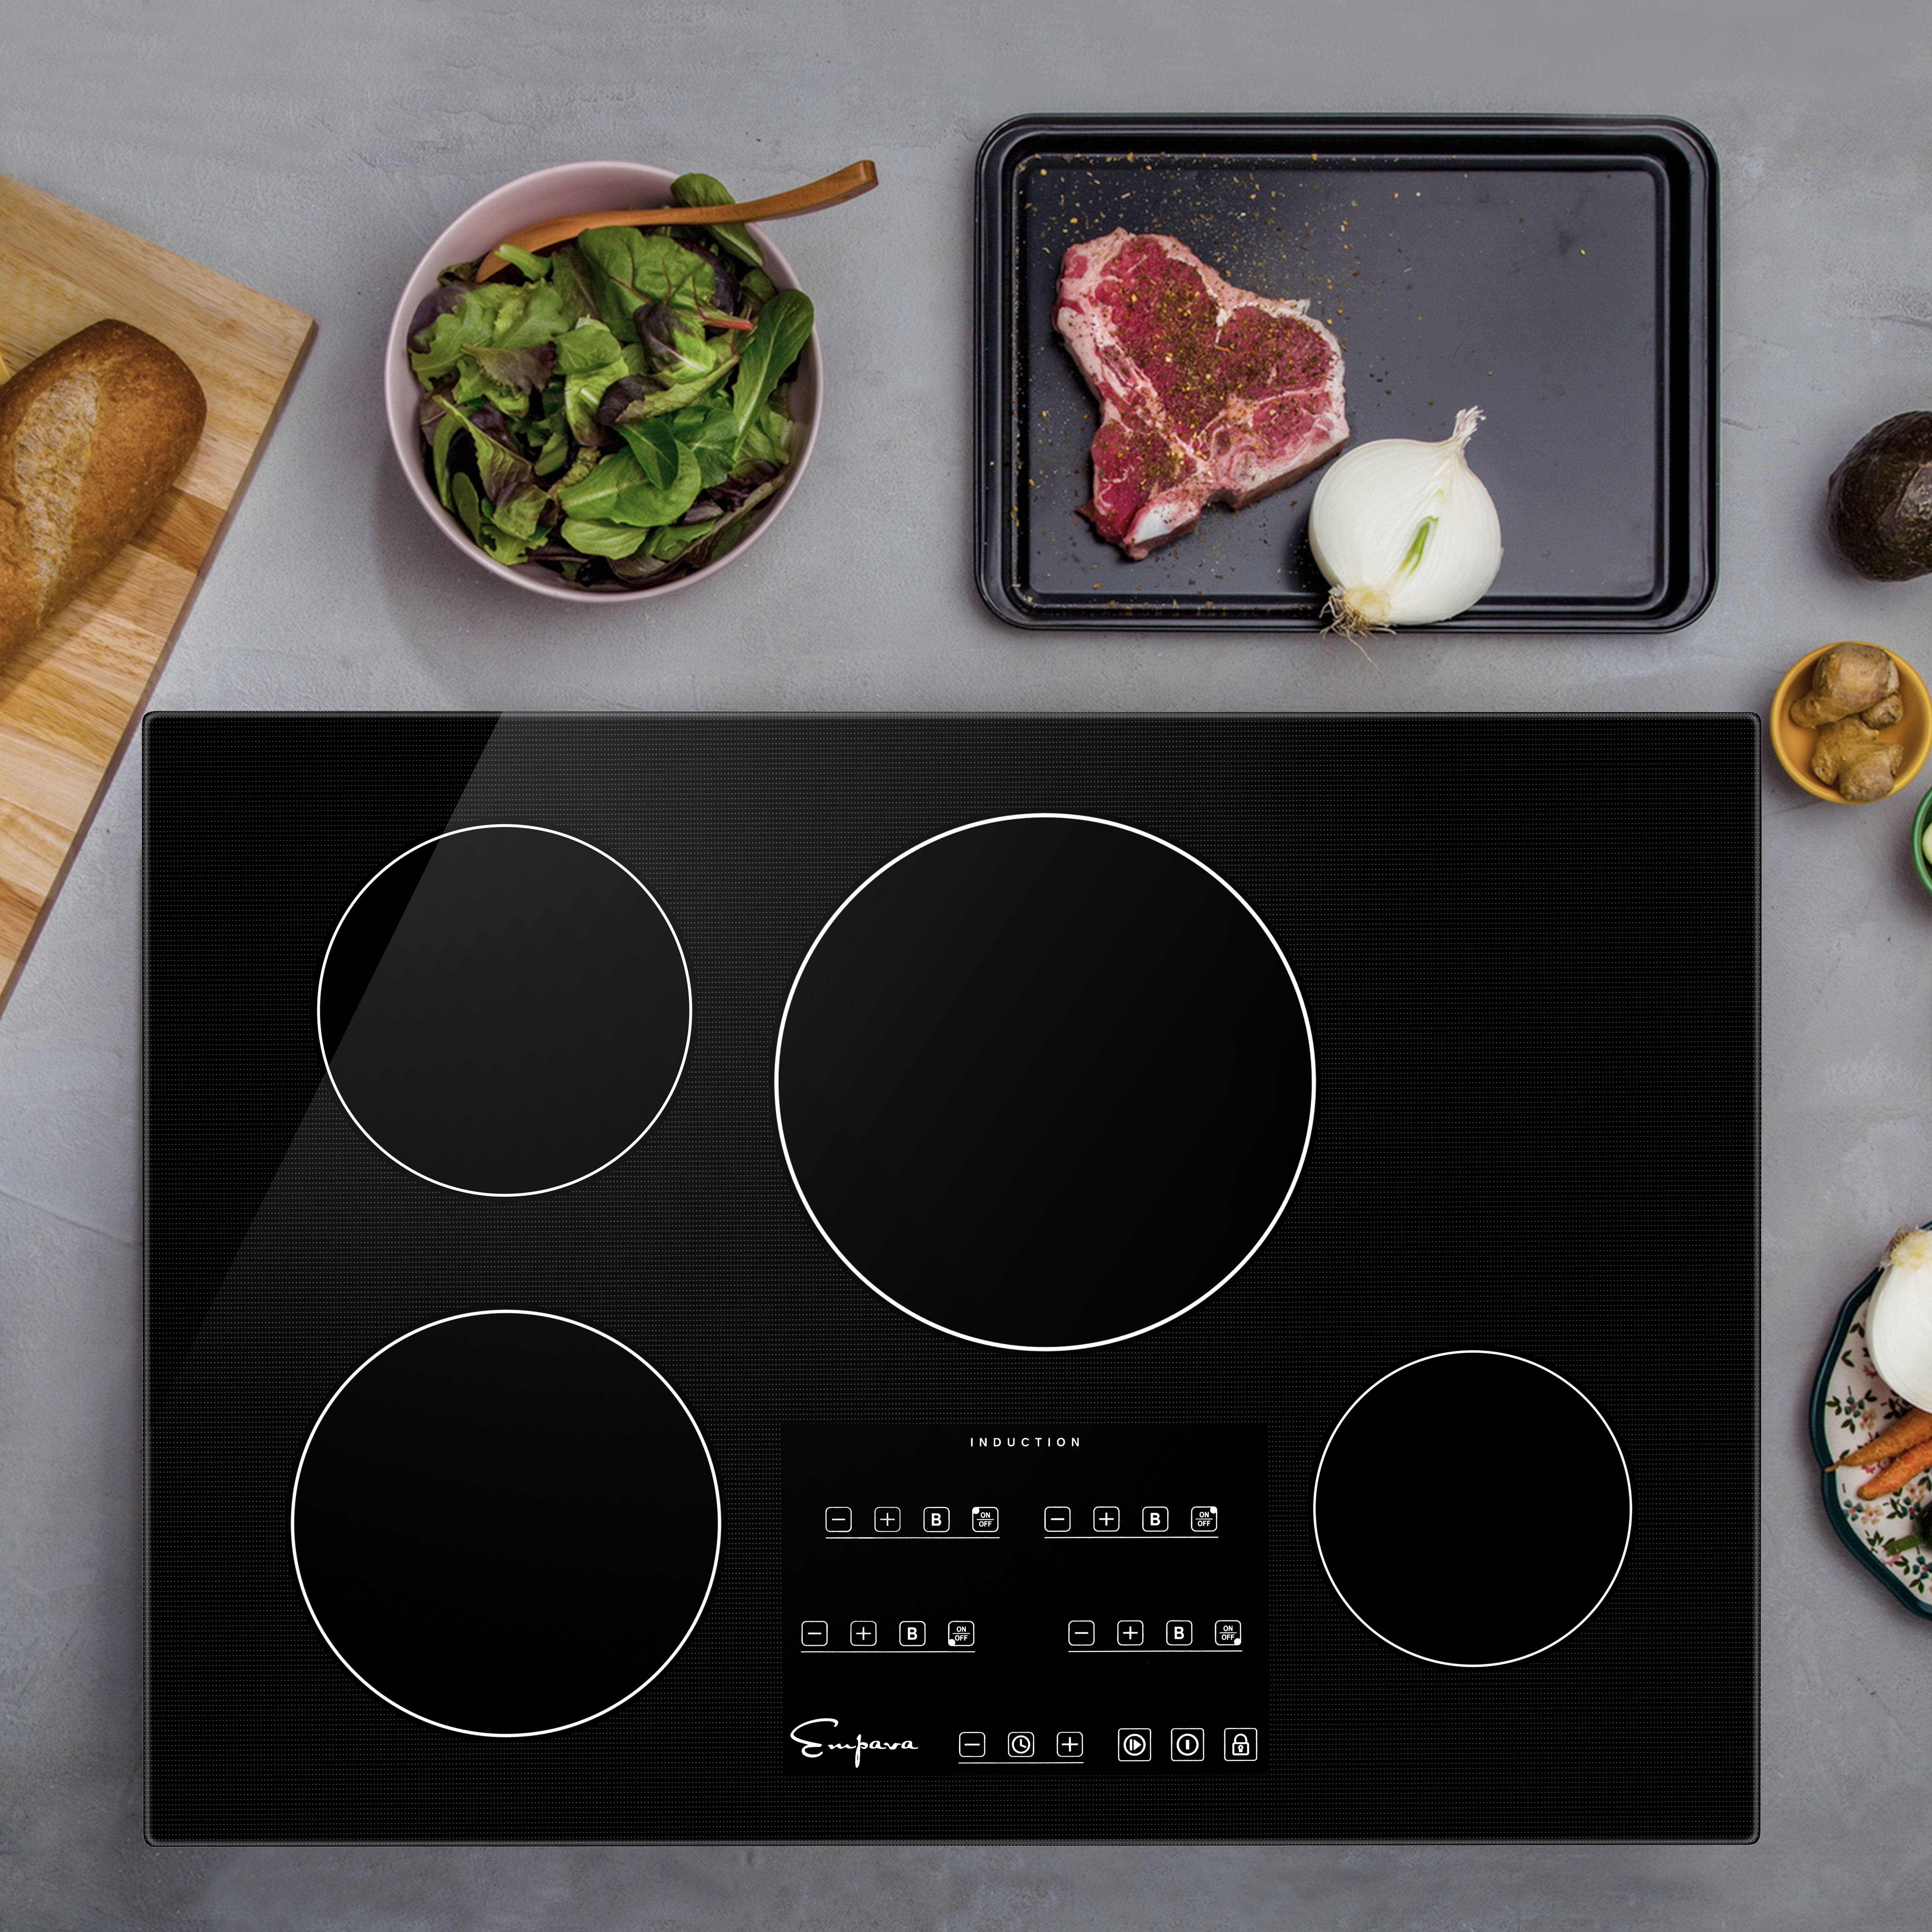 empava-30-empv-idc30-induction-cooktop-with-4-booster-burners-on-black